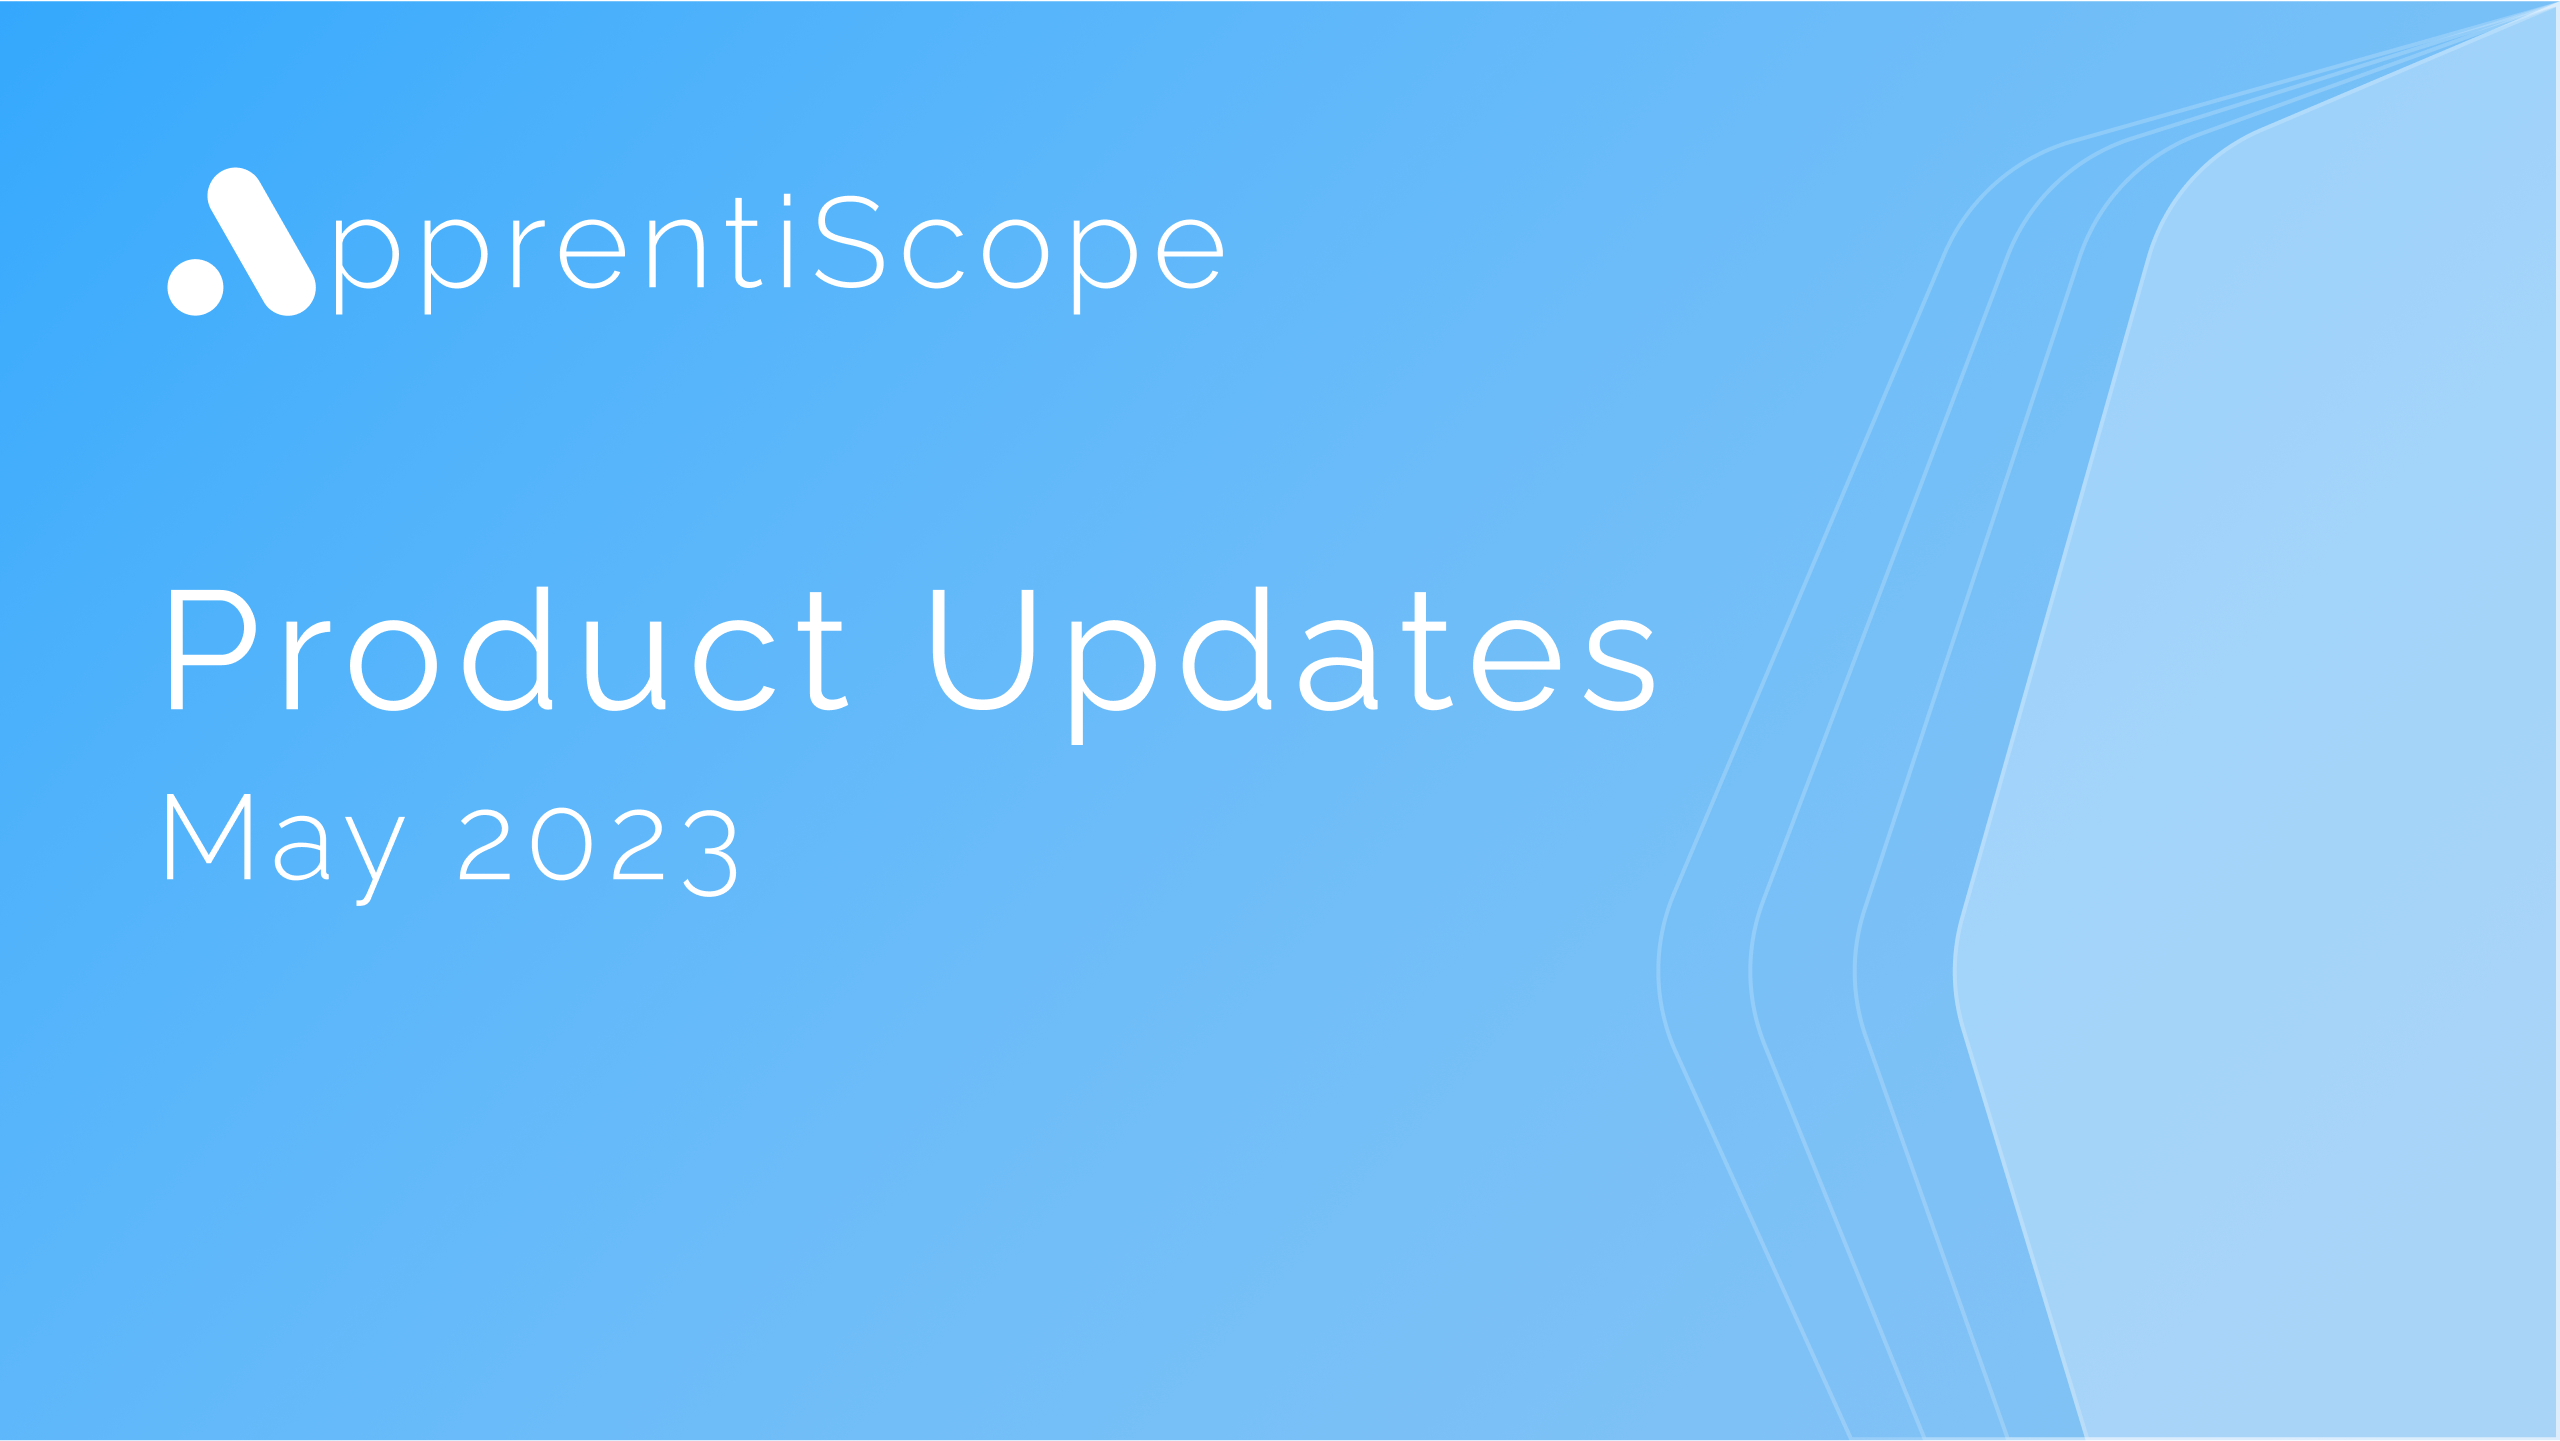 ApprentiScope Product Updates for May 2023